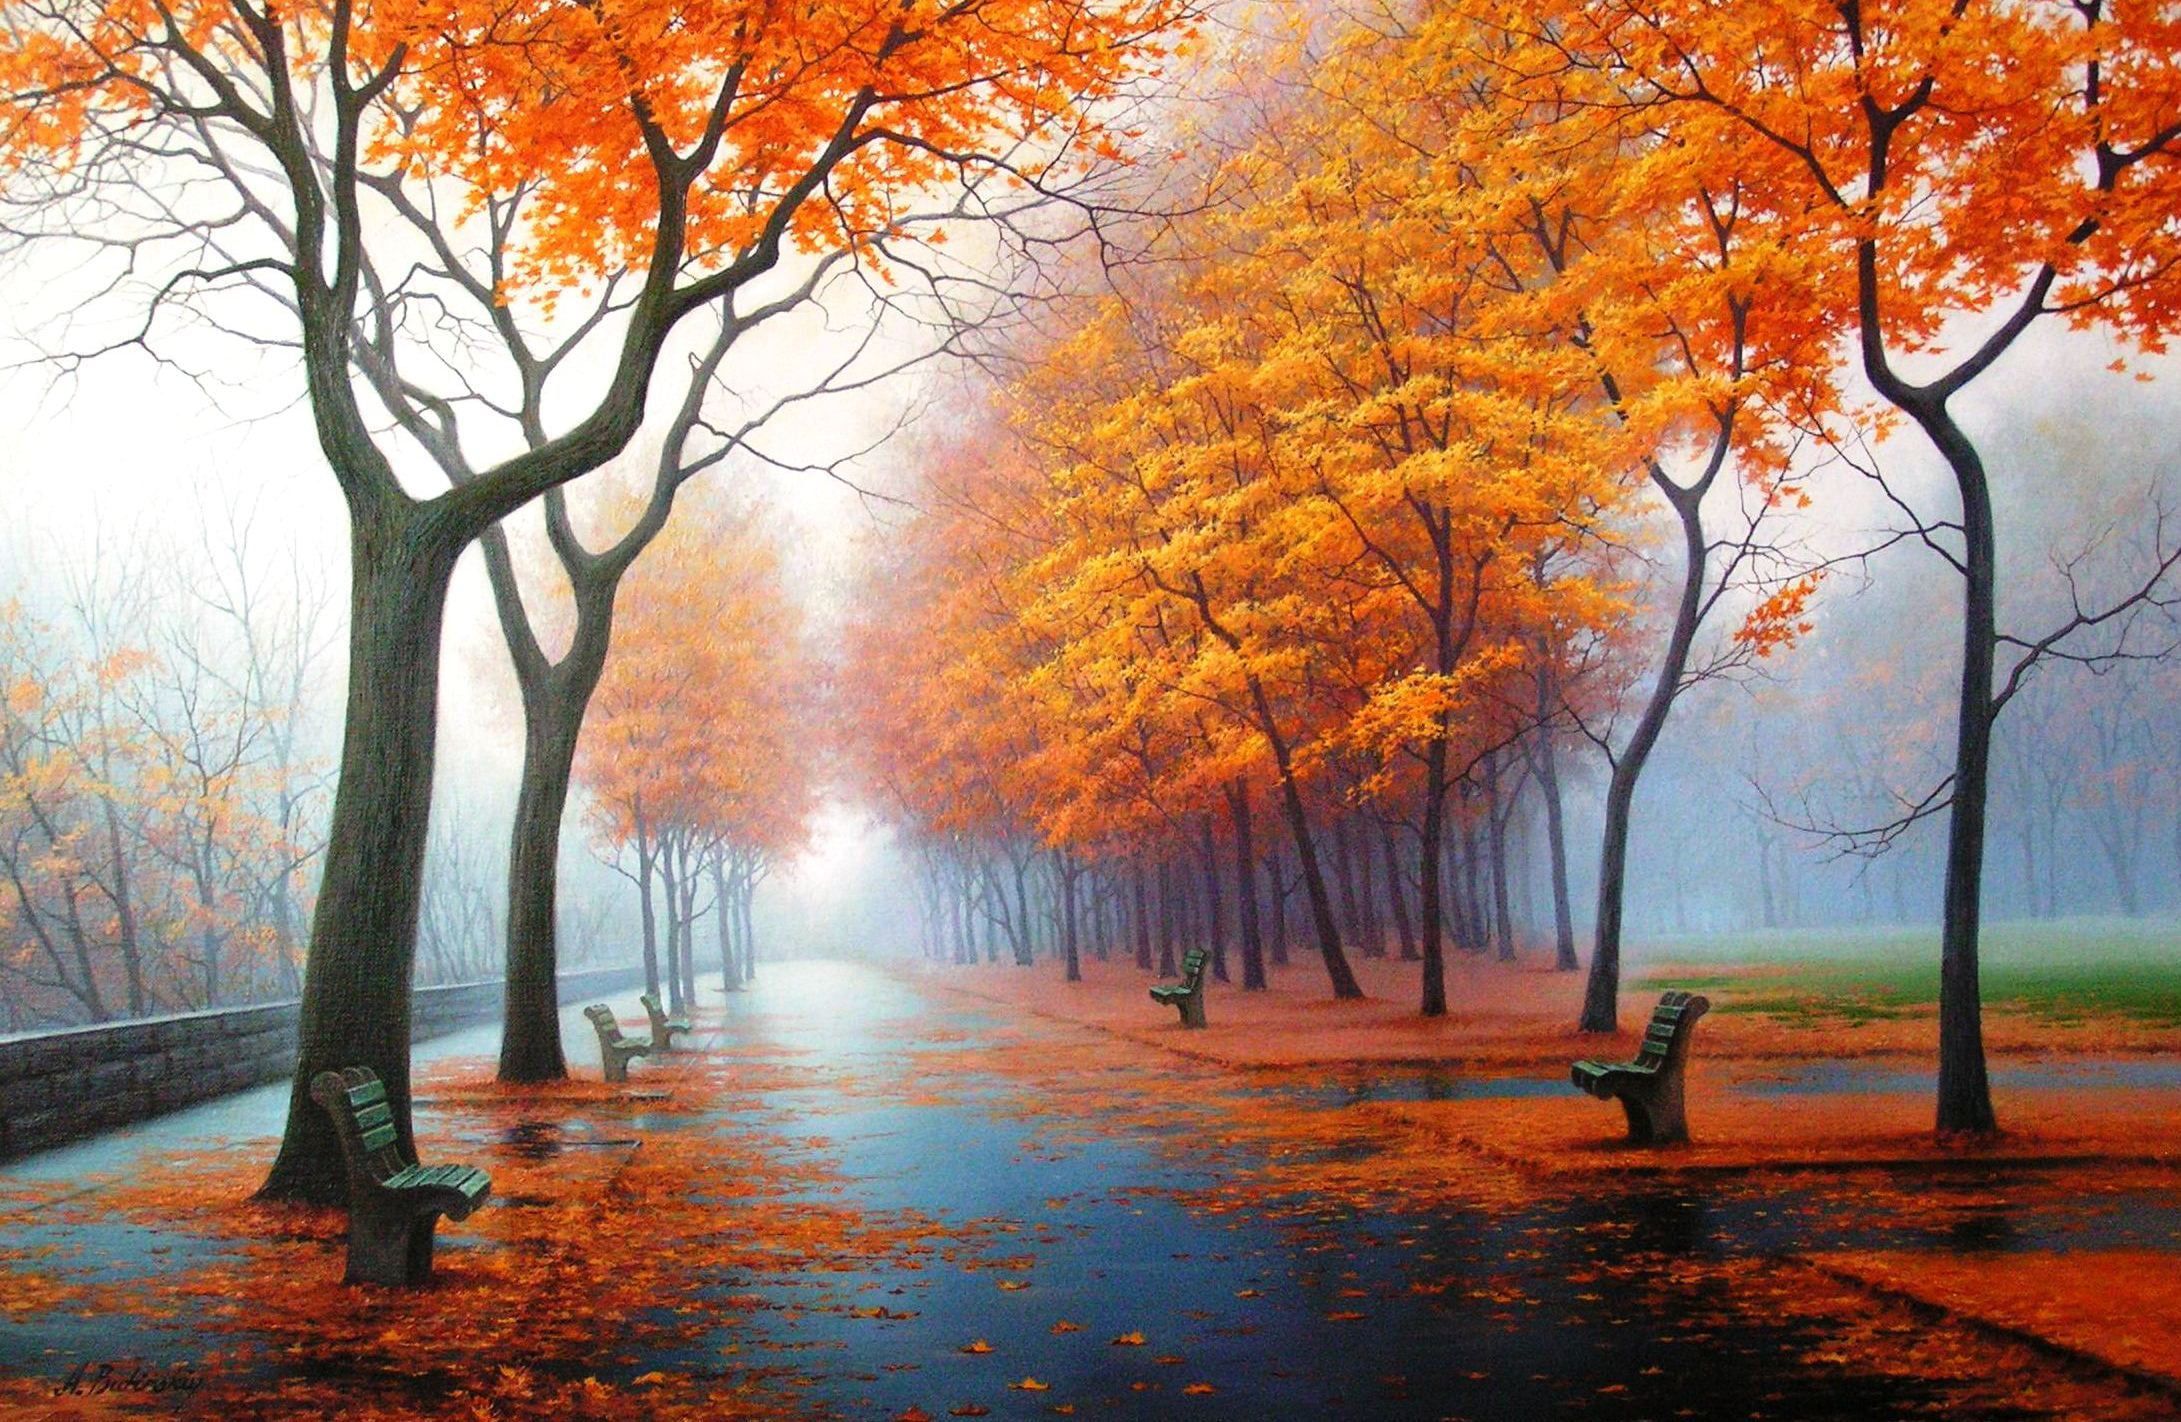 orange leafed trees painting #autumn #nature #Park #figure #picture #art #drawings #picture. Fall wallpaper, Beautiful wallpaper hd, Desktop wallpaper fall